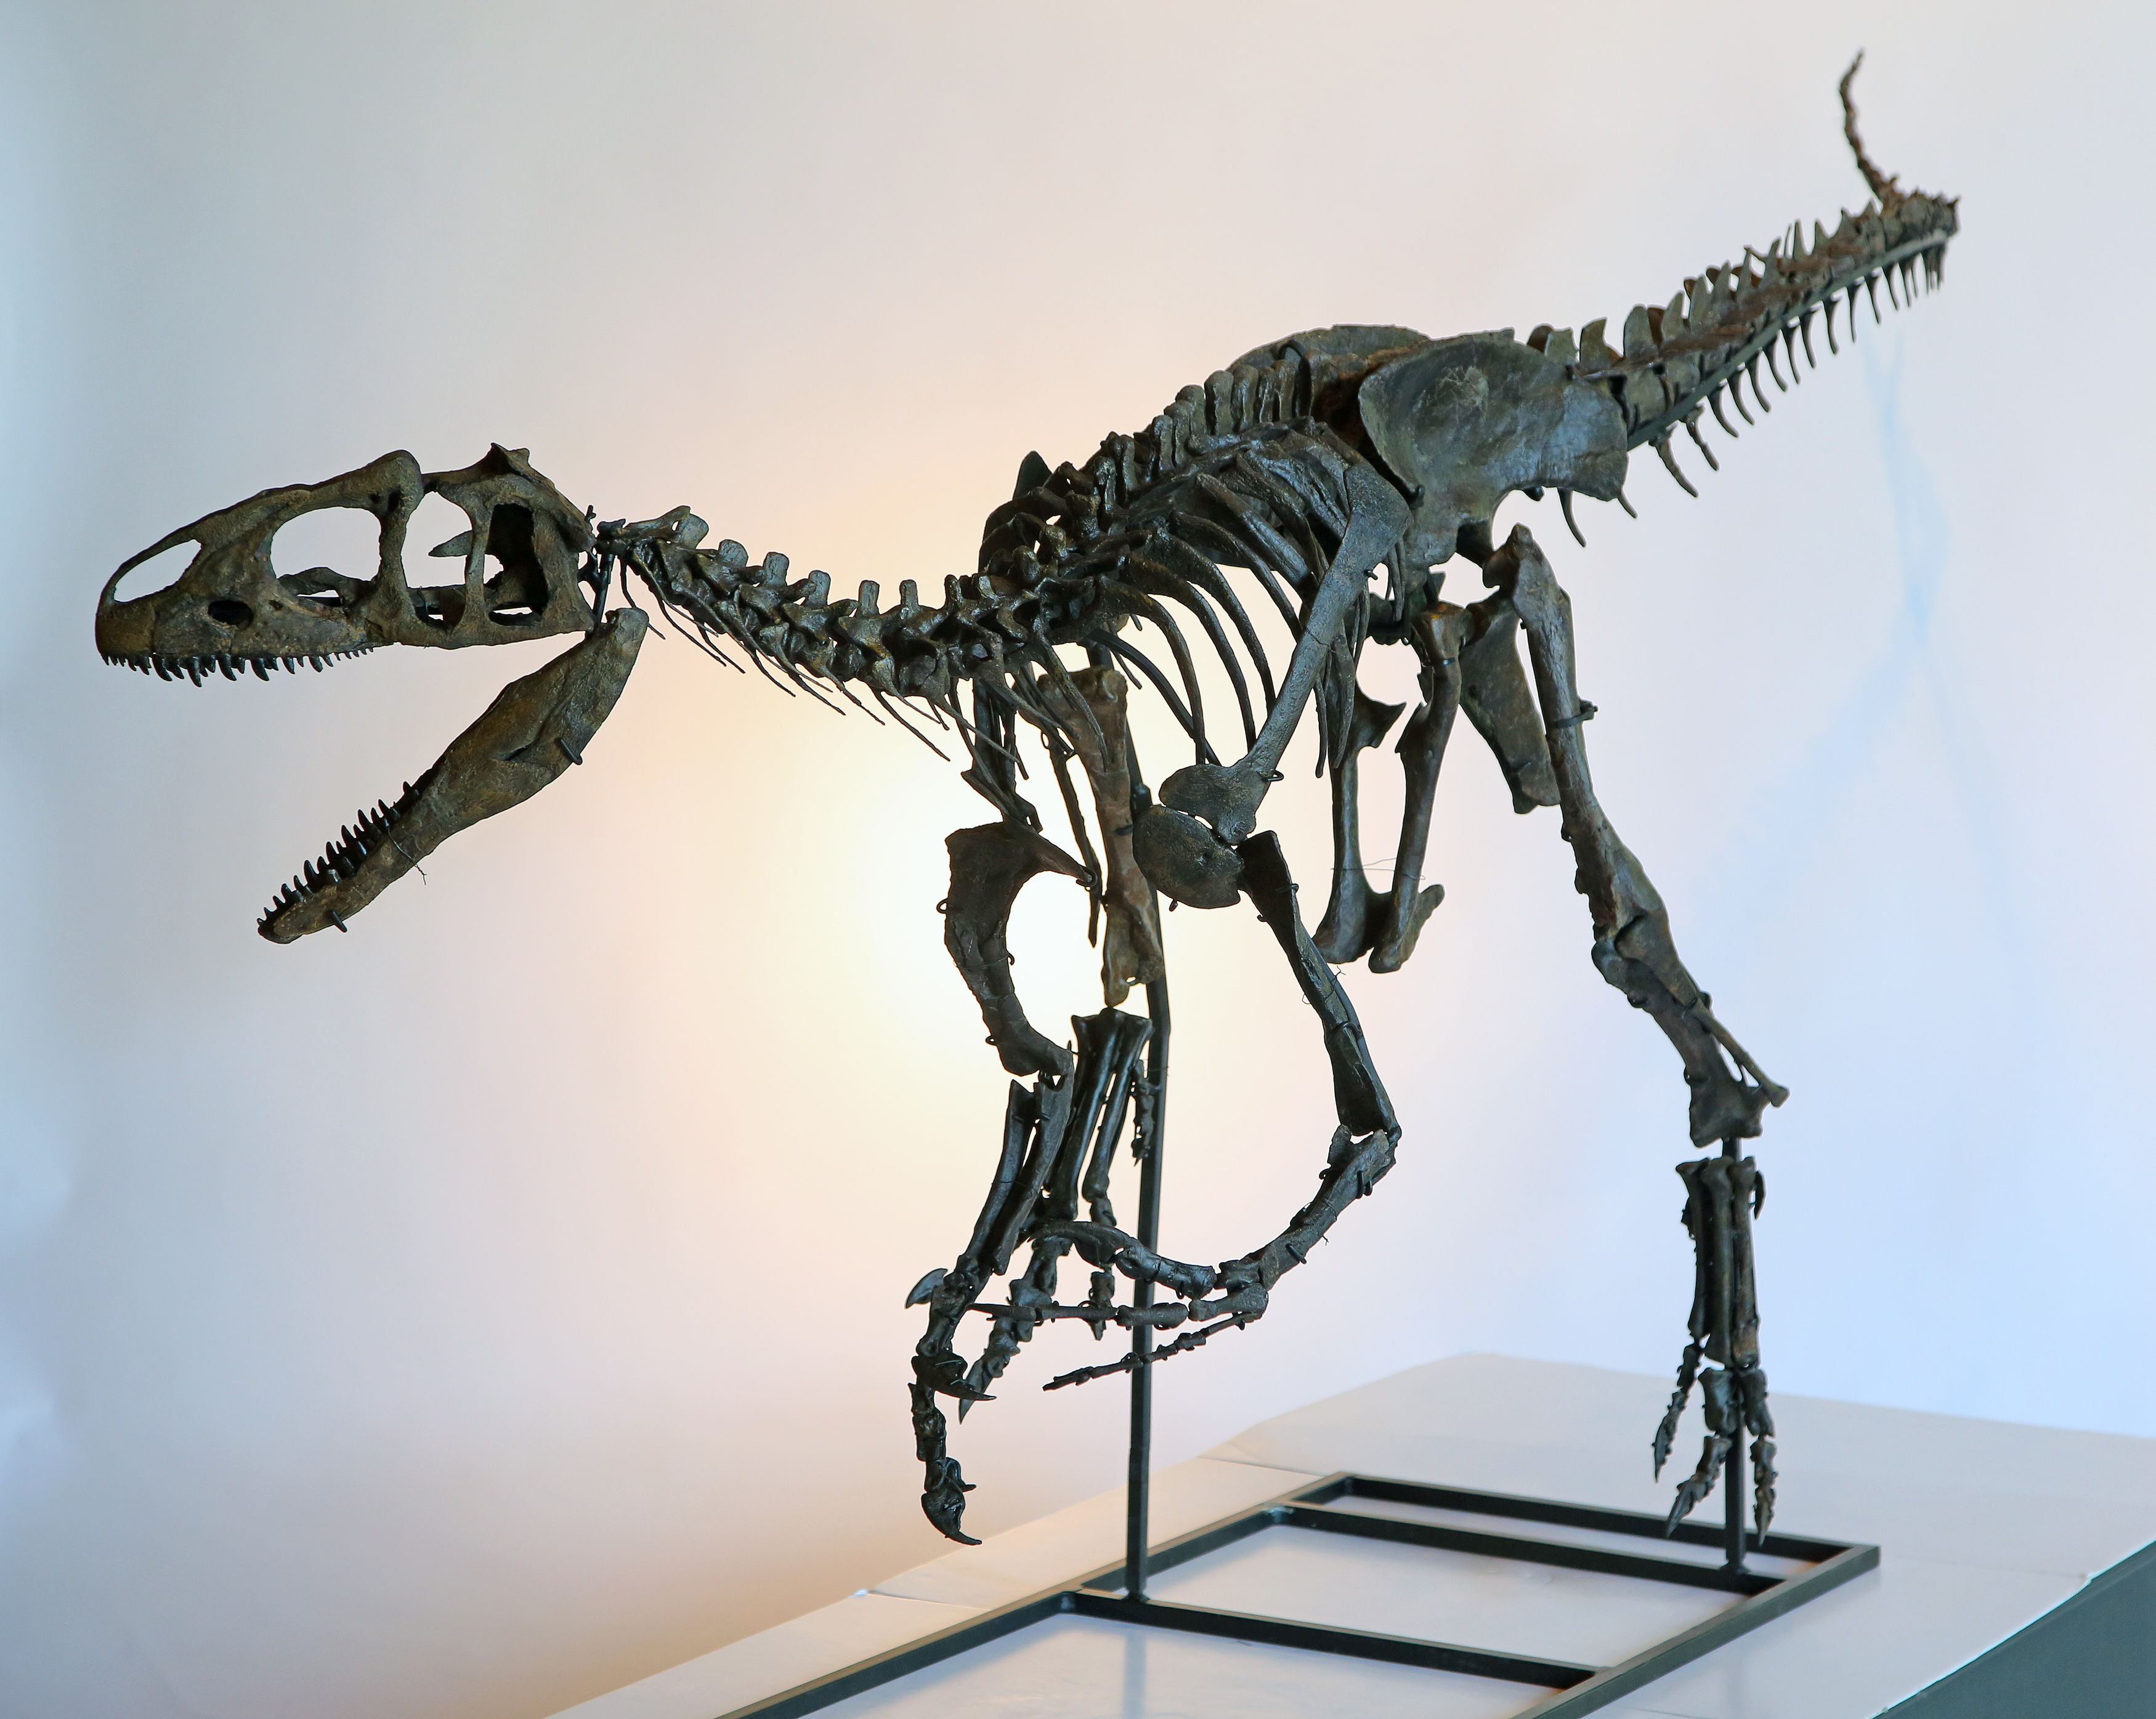 A rare skeleton of a juvenile Allosaurus dinosaur at Summers Place Auctions in West Sussex, England is set to fetch up to £500,000 at an auction in November. (Gareth Fuller—AP)